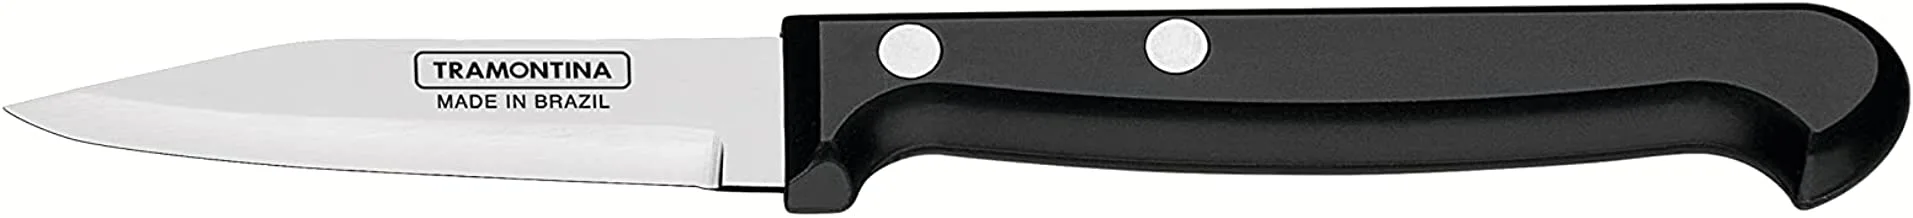 Tramontina Ultracorte 3 Inches Vegetable and Fruit Knife with Stainless Steel Blade and Black Polypropylene Handle